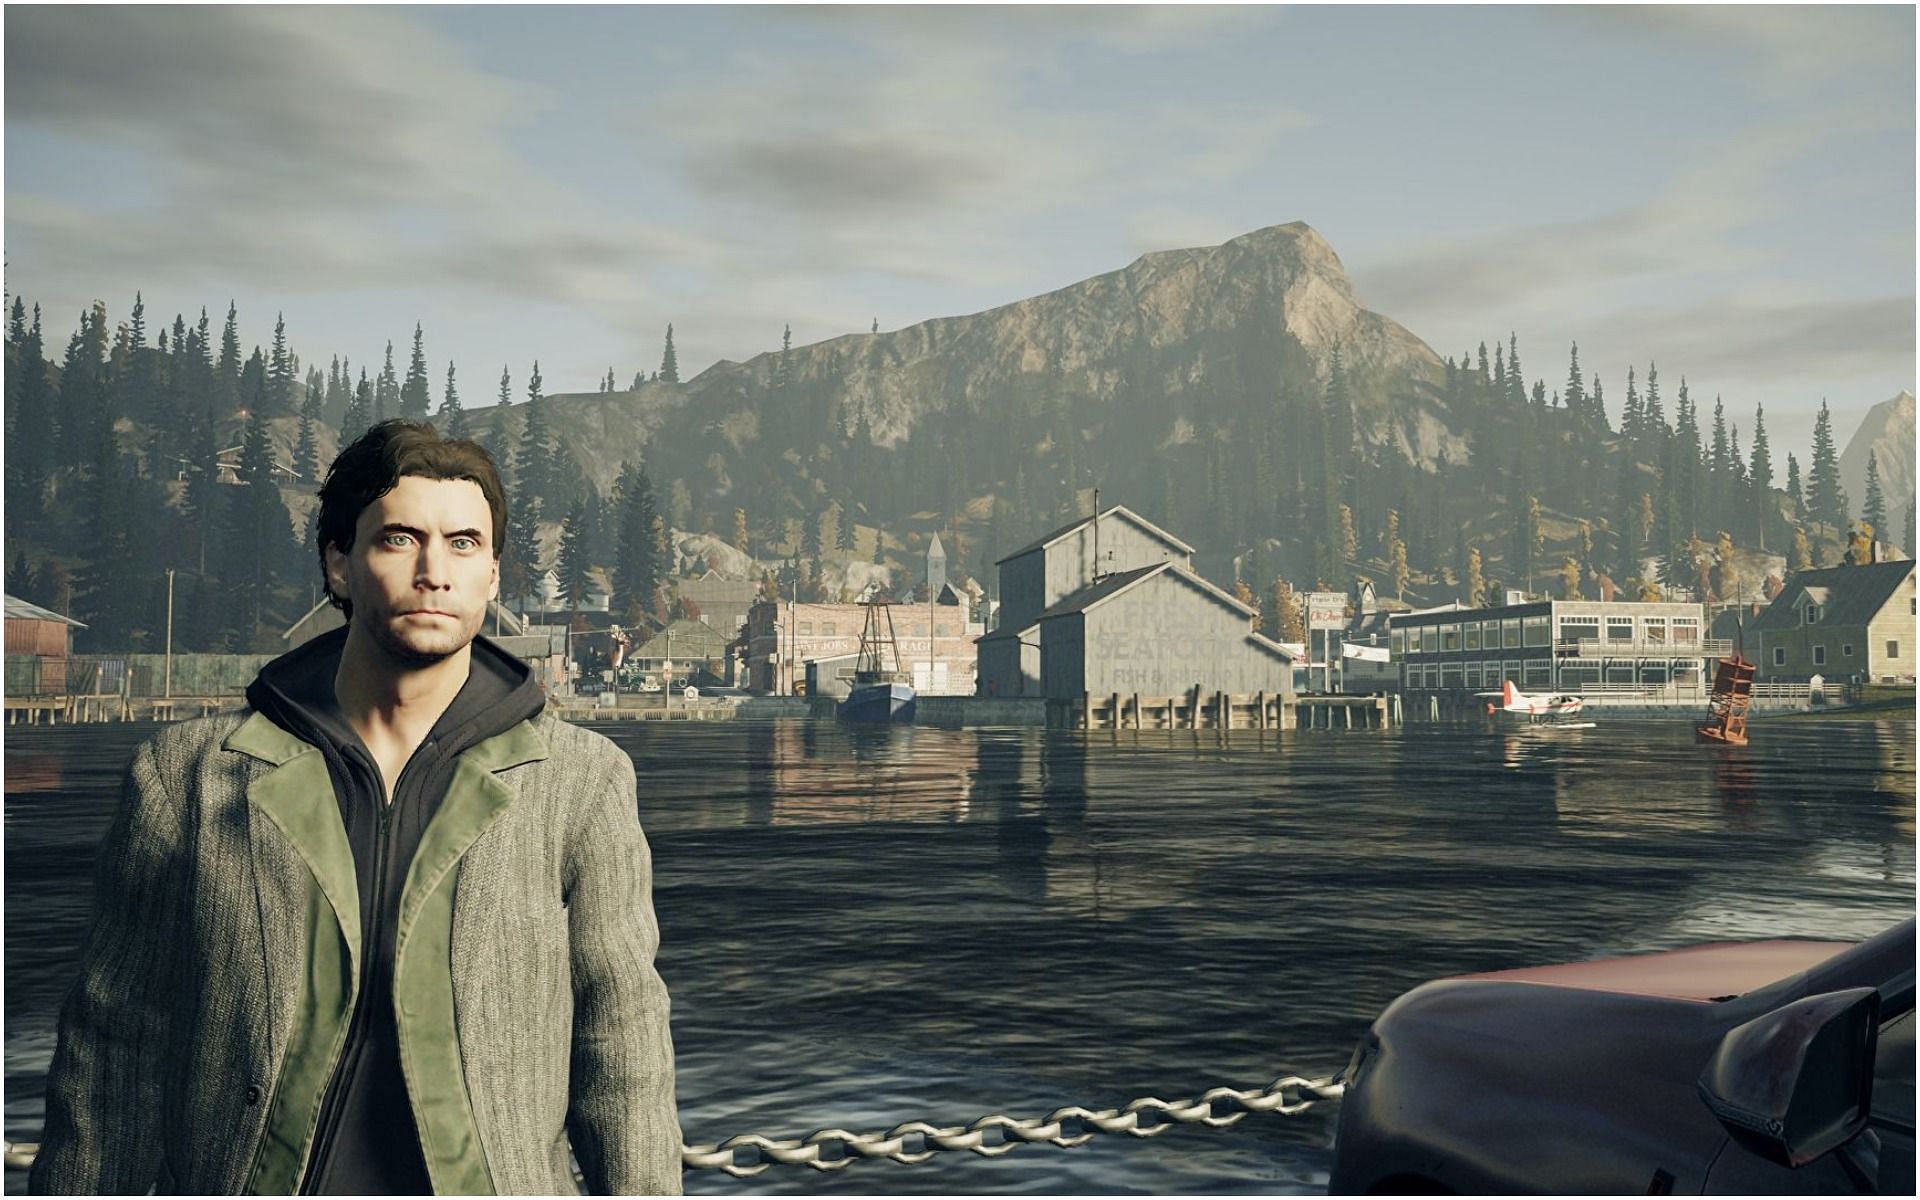 Alan Wake 2 is coming to PC and next-gen consoles in 2023 (Image via Alan Wake)